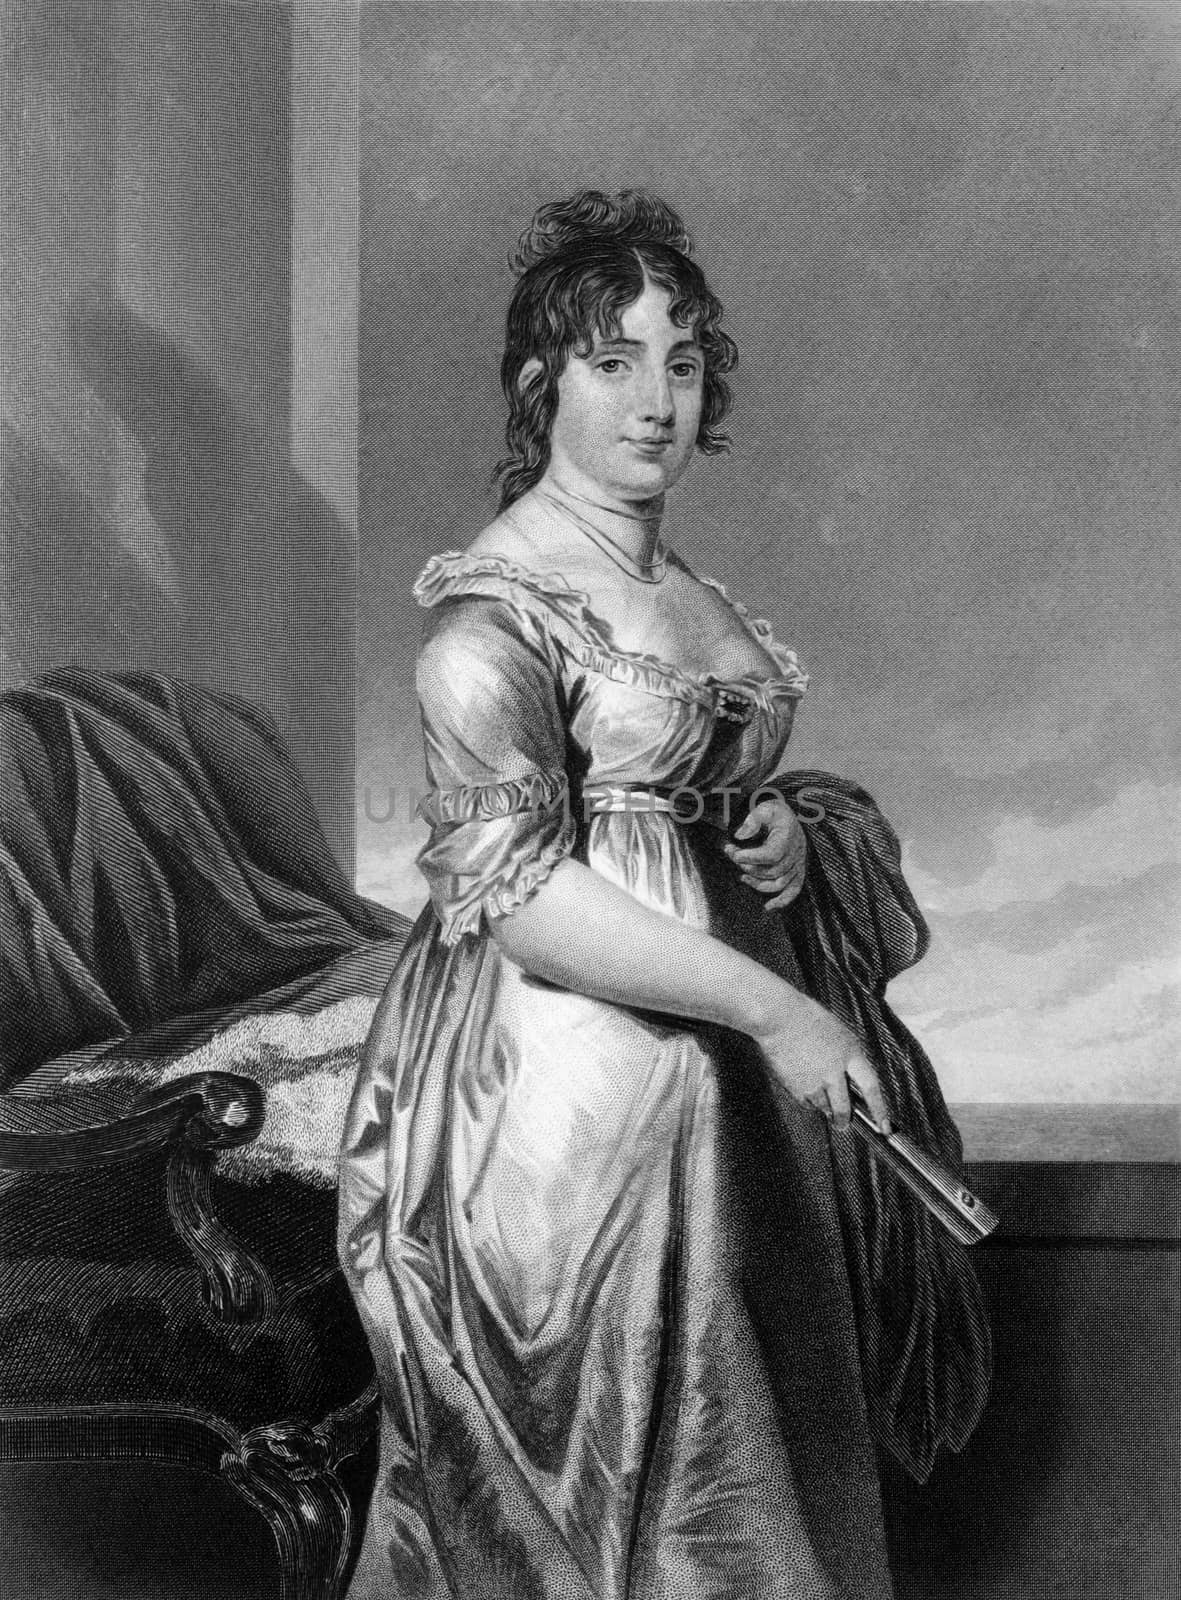 Dolley Madison (1768-1849) on engraving from 1873.  Wife of James Madison, President of the USA. Engraved by unknown artist and published in ''Portrait Gallery of Eminent Men and Women with Biographies'',USA,1873.